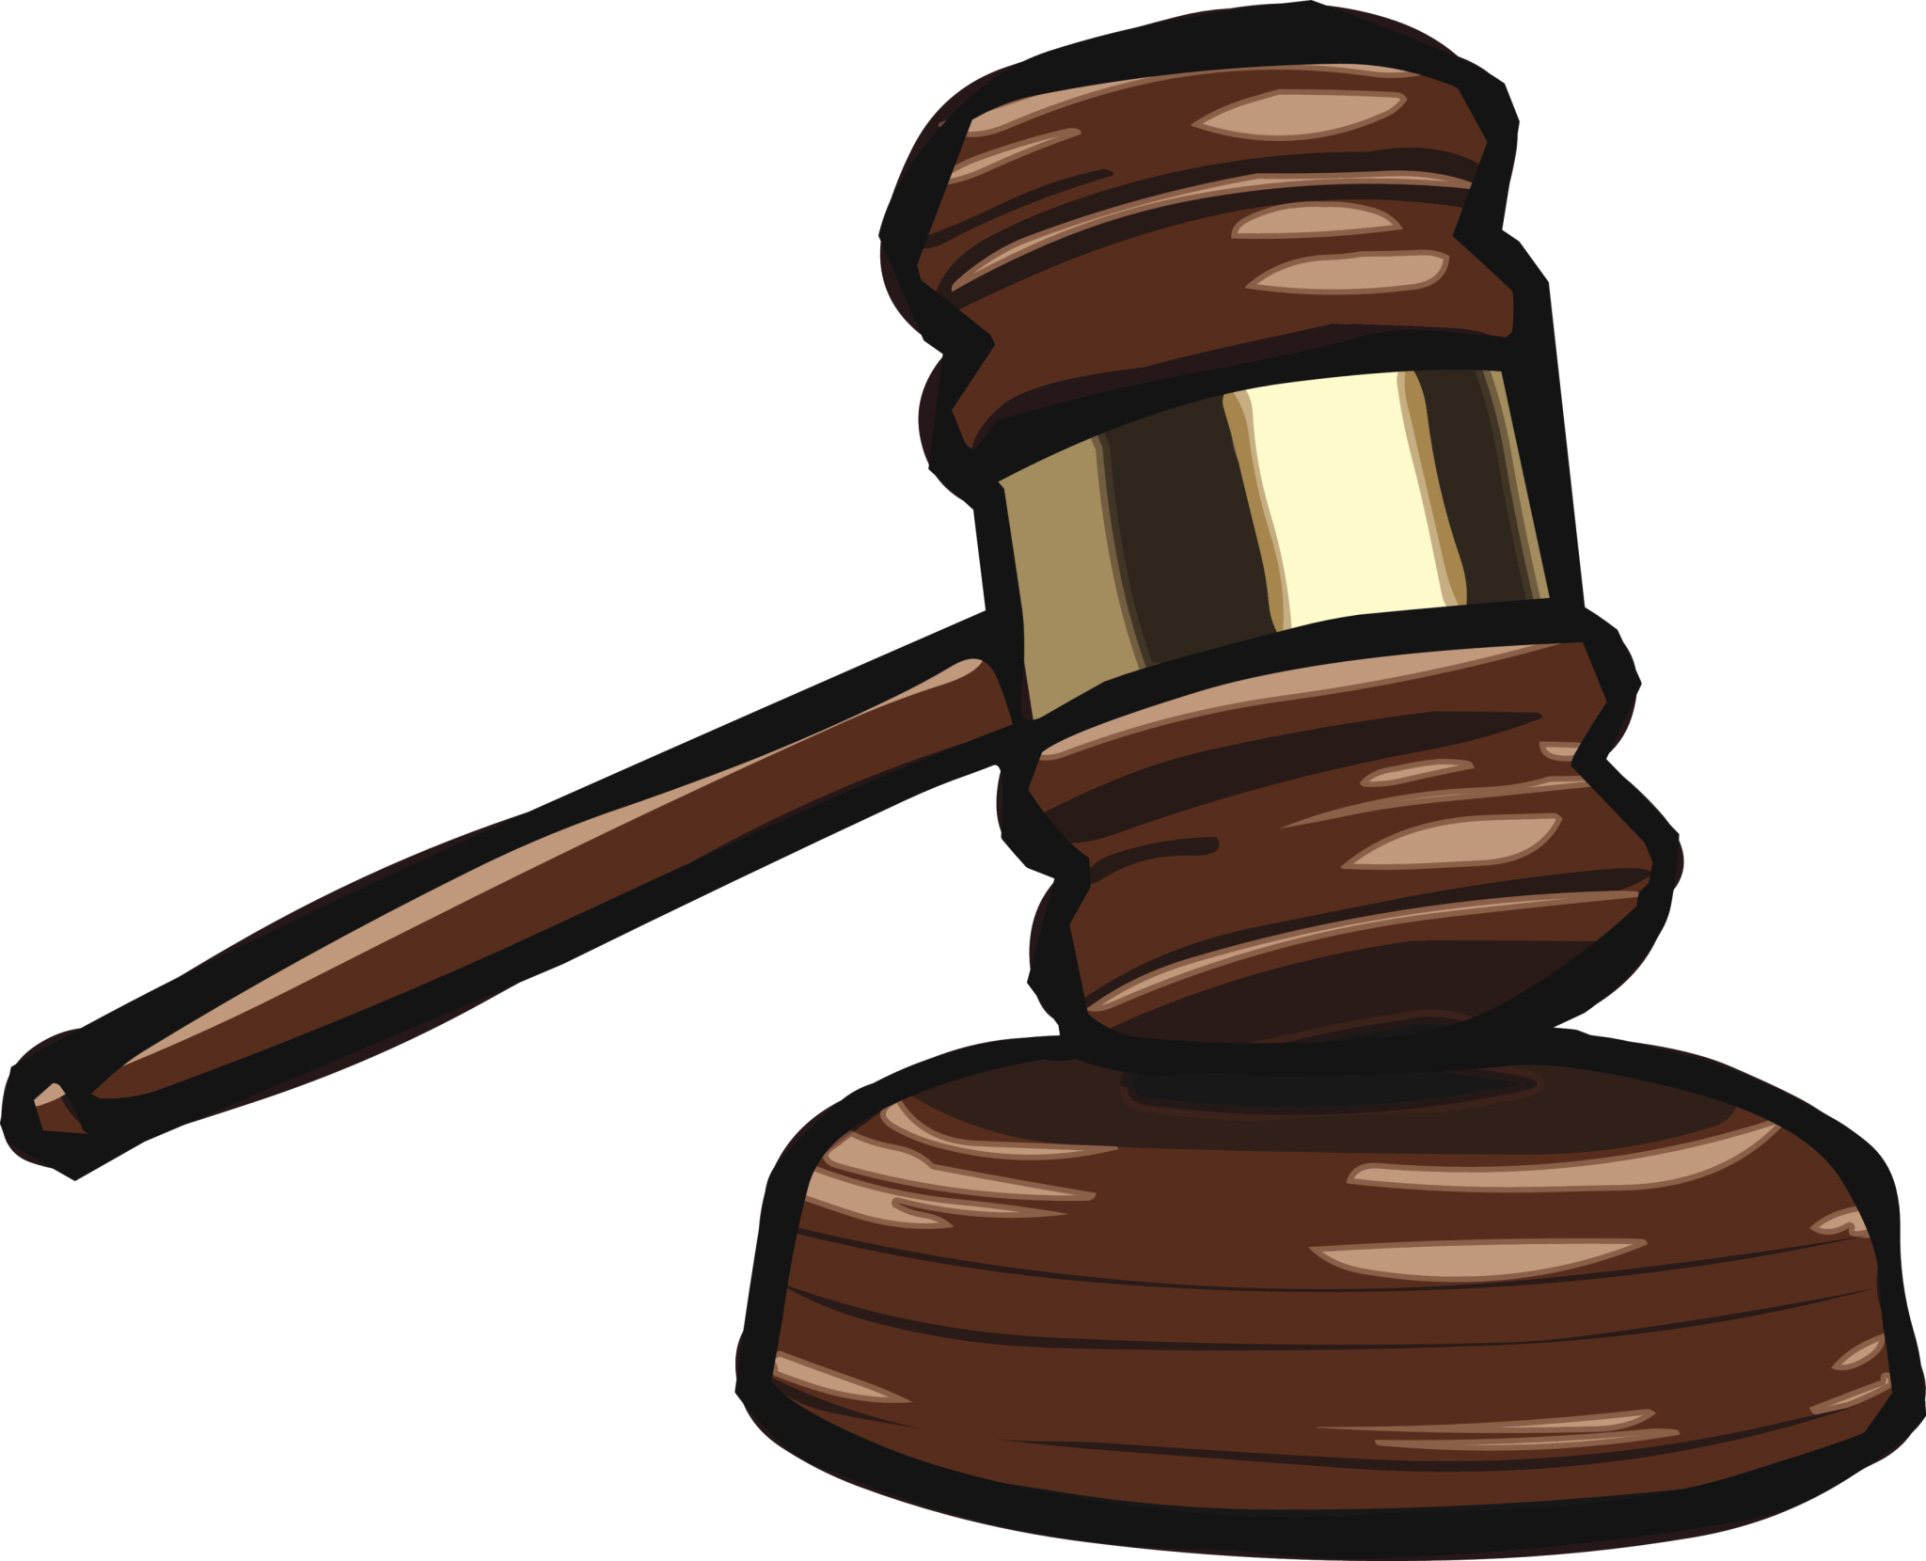 Gavel clipart federal courts. Court cliparts free download